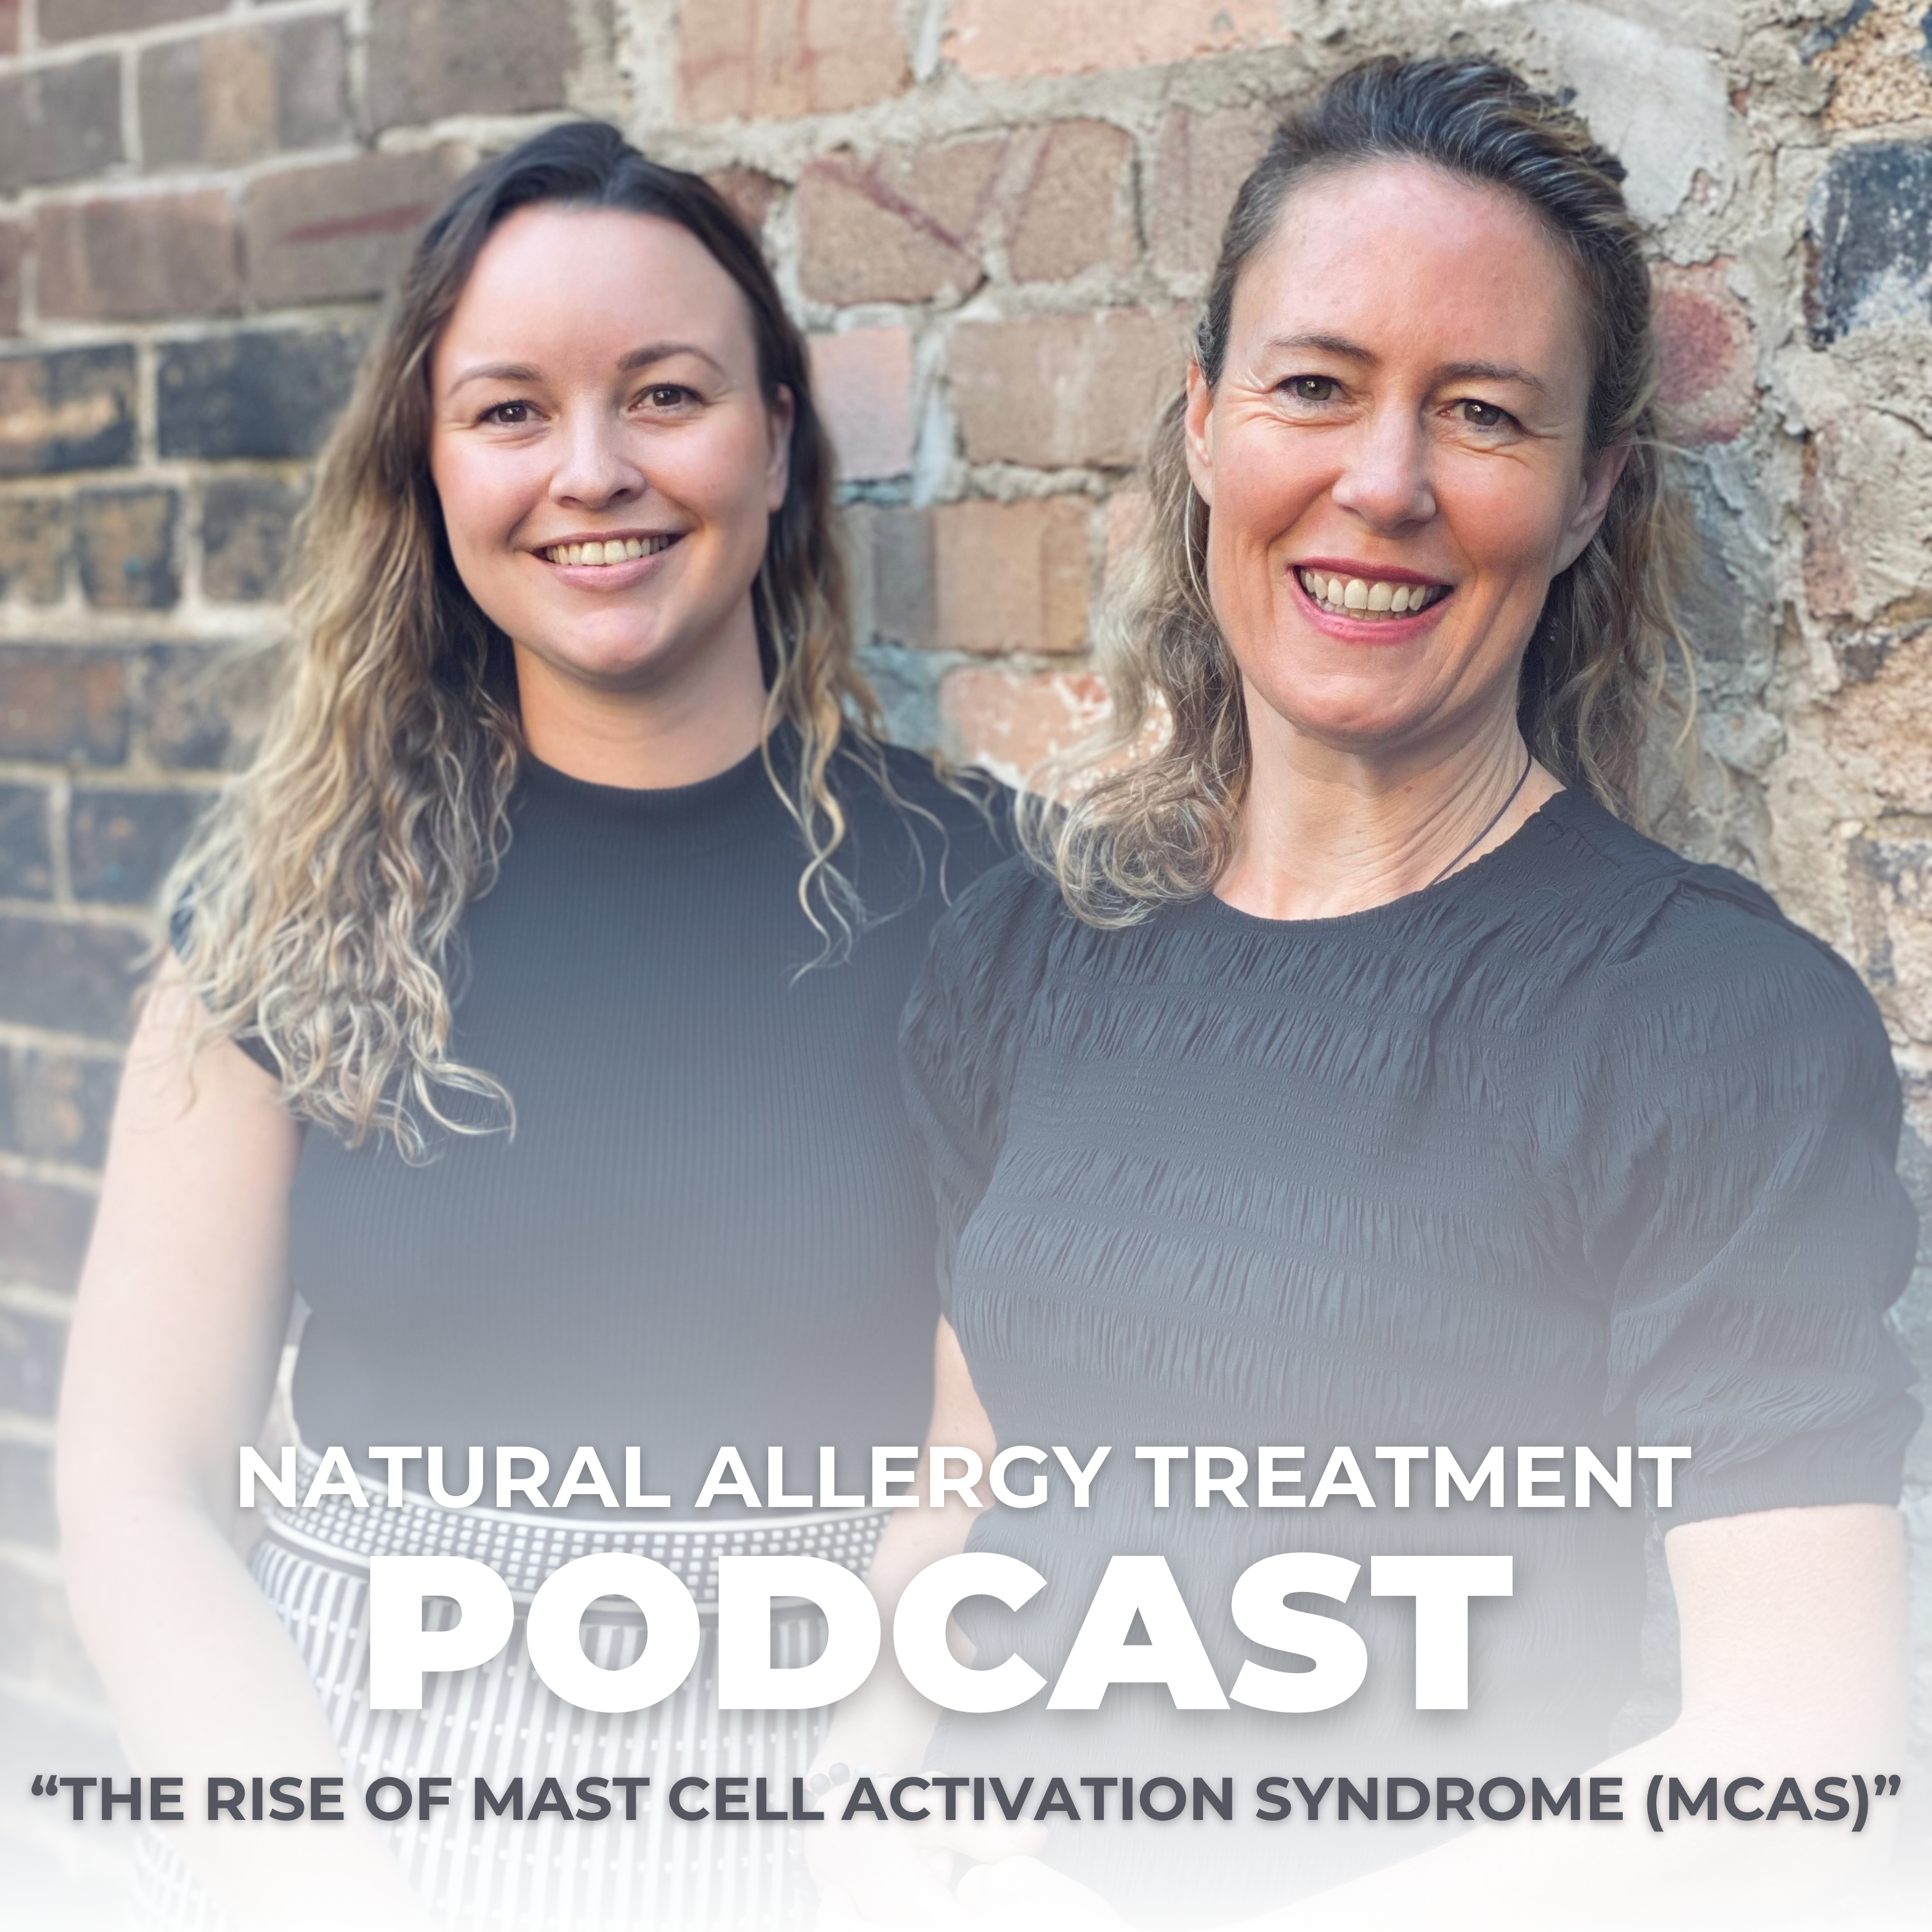 The Rise of Mast Cell Activation Syndrome (MCAS)